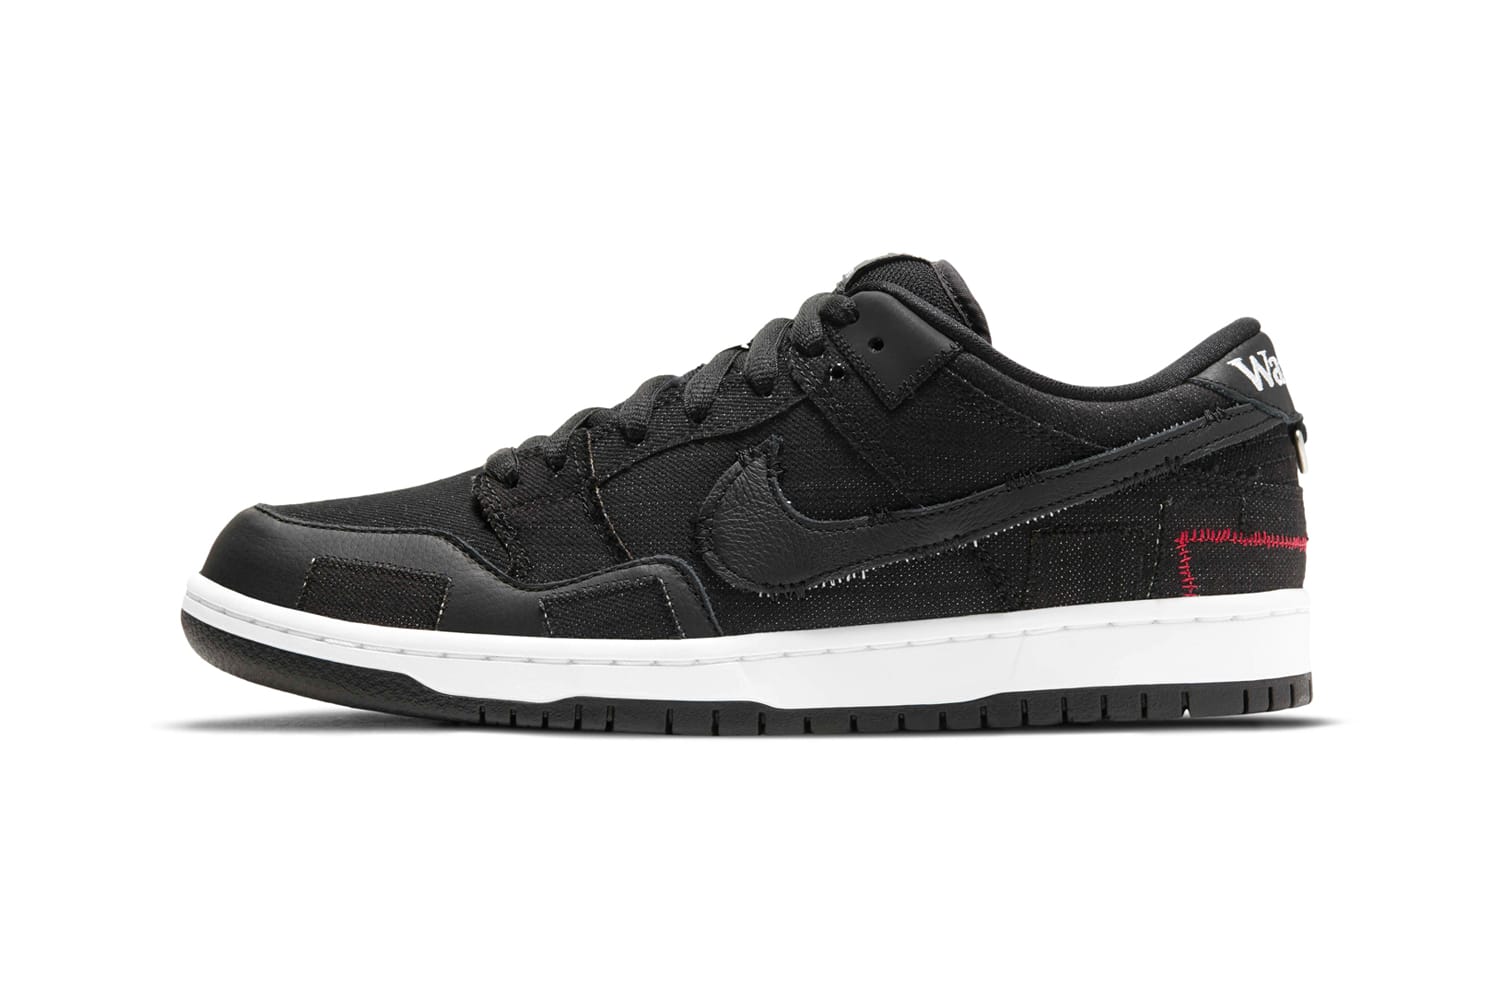 NIKE SB DUNK LOW " Wasted Youth"